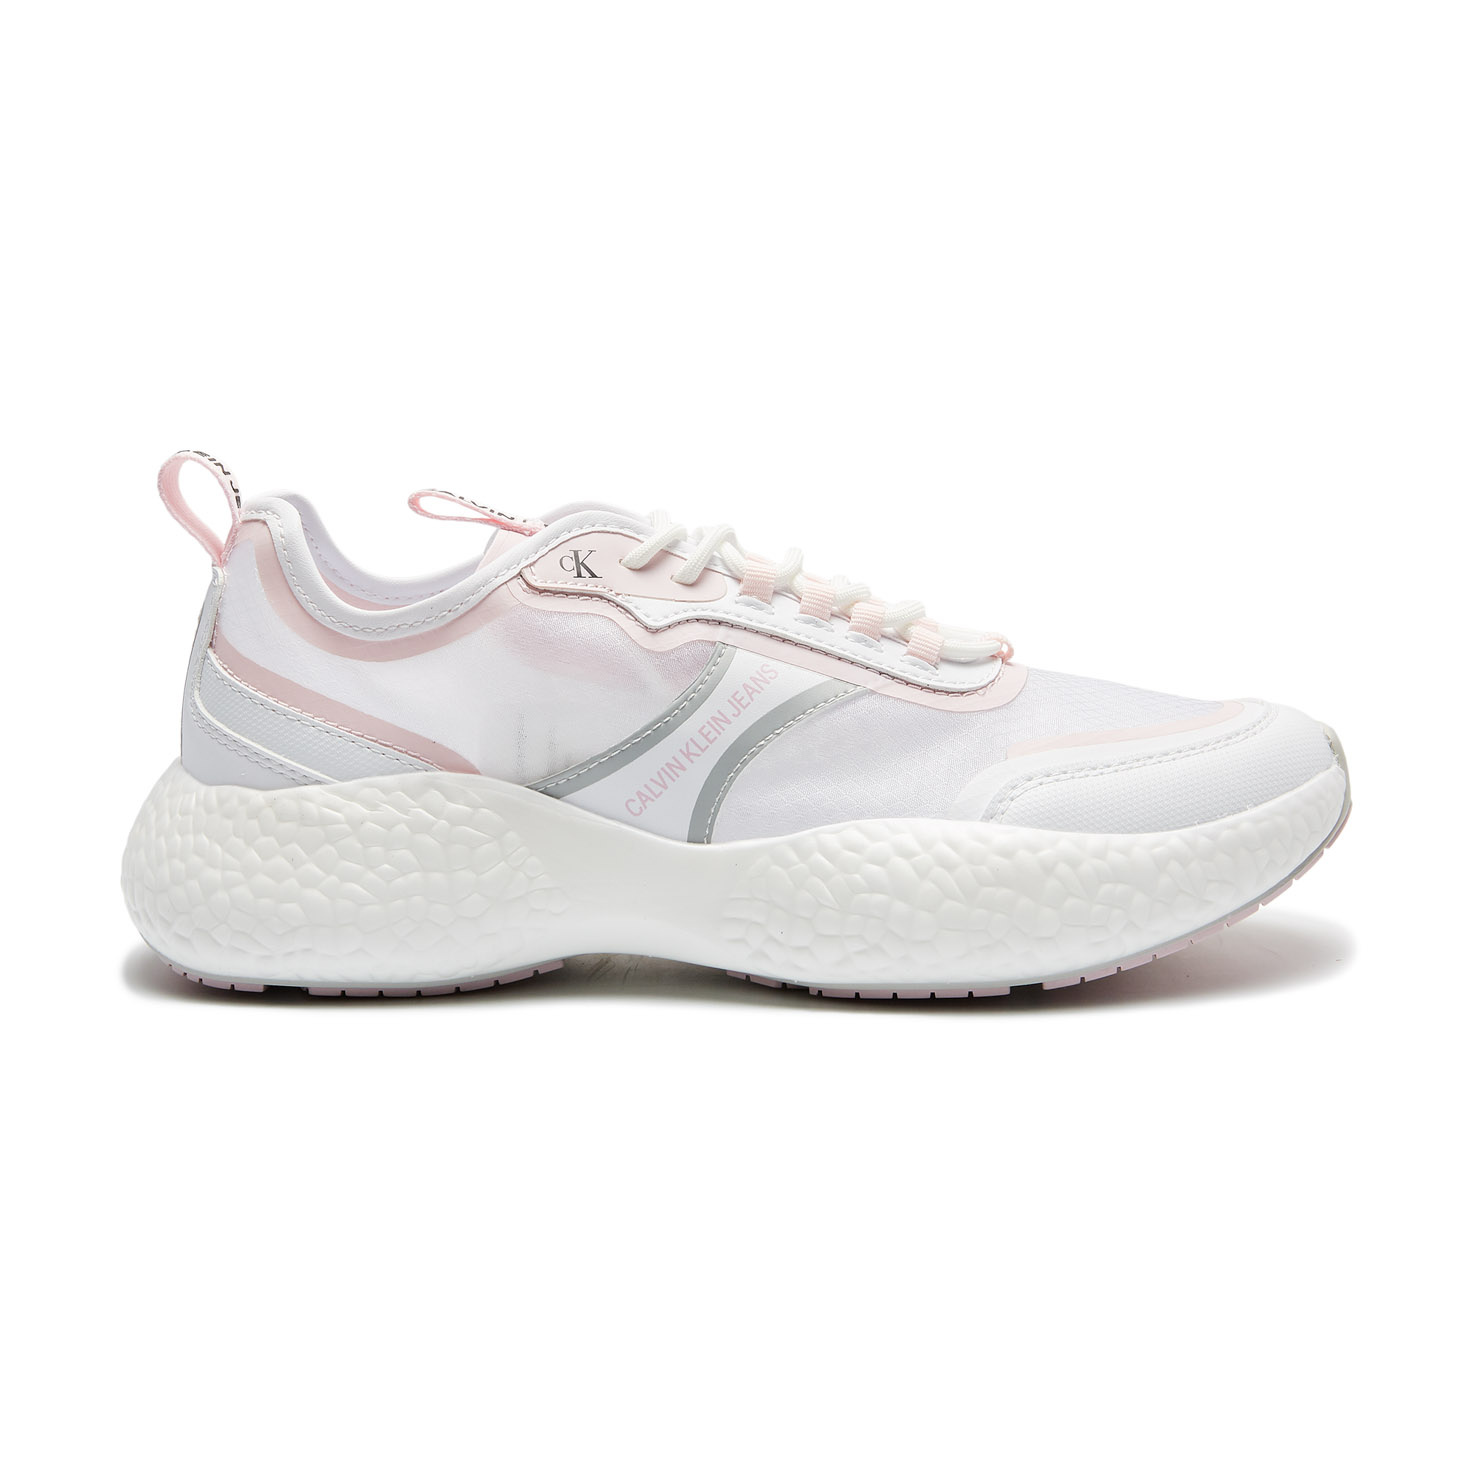 RUNNER SNEAKER LACEUP PU-NY